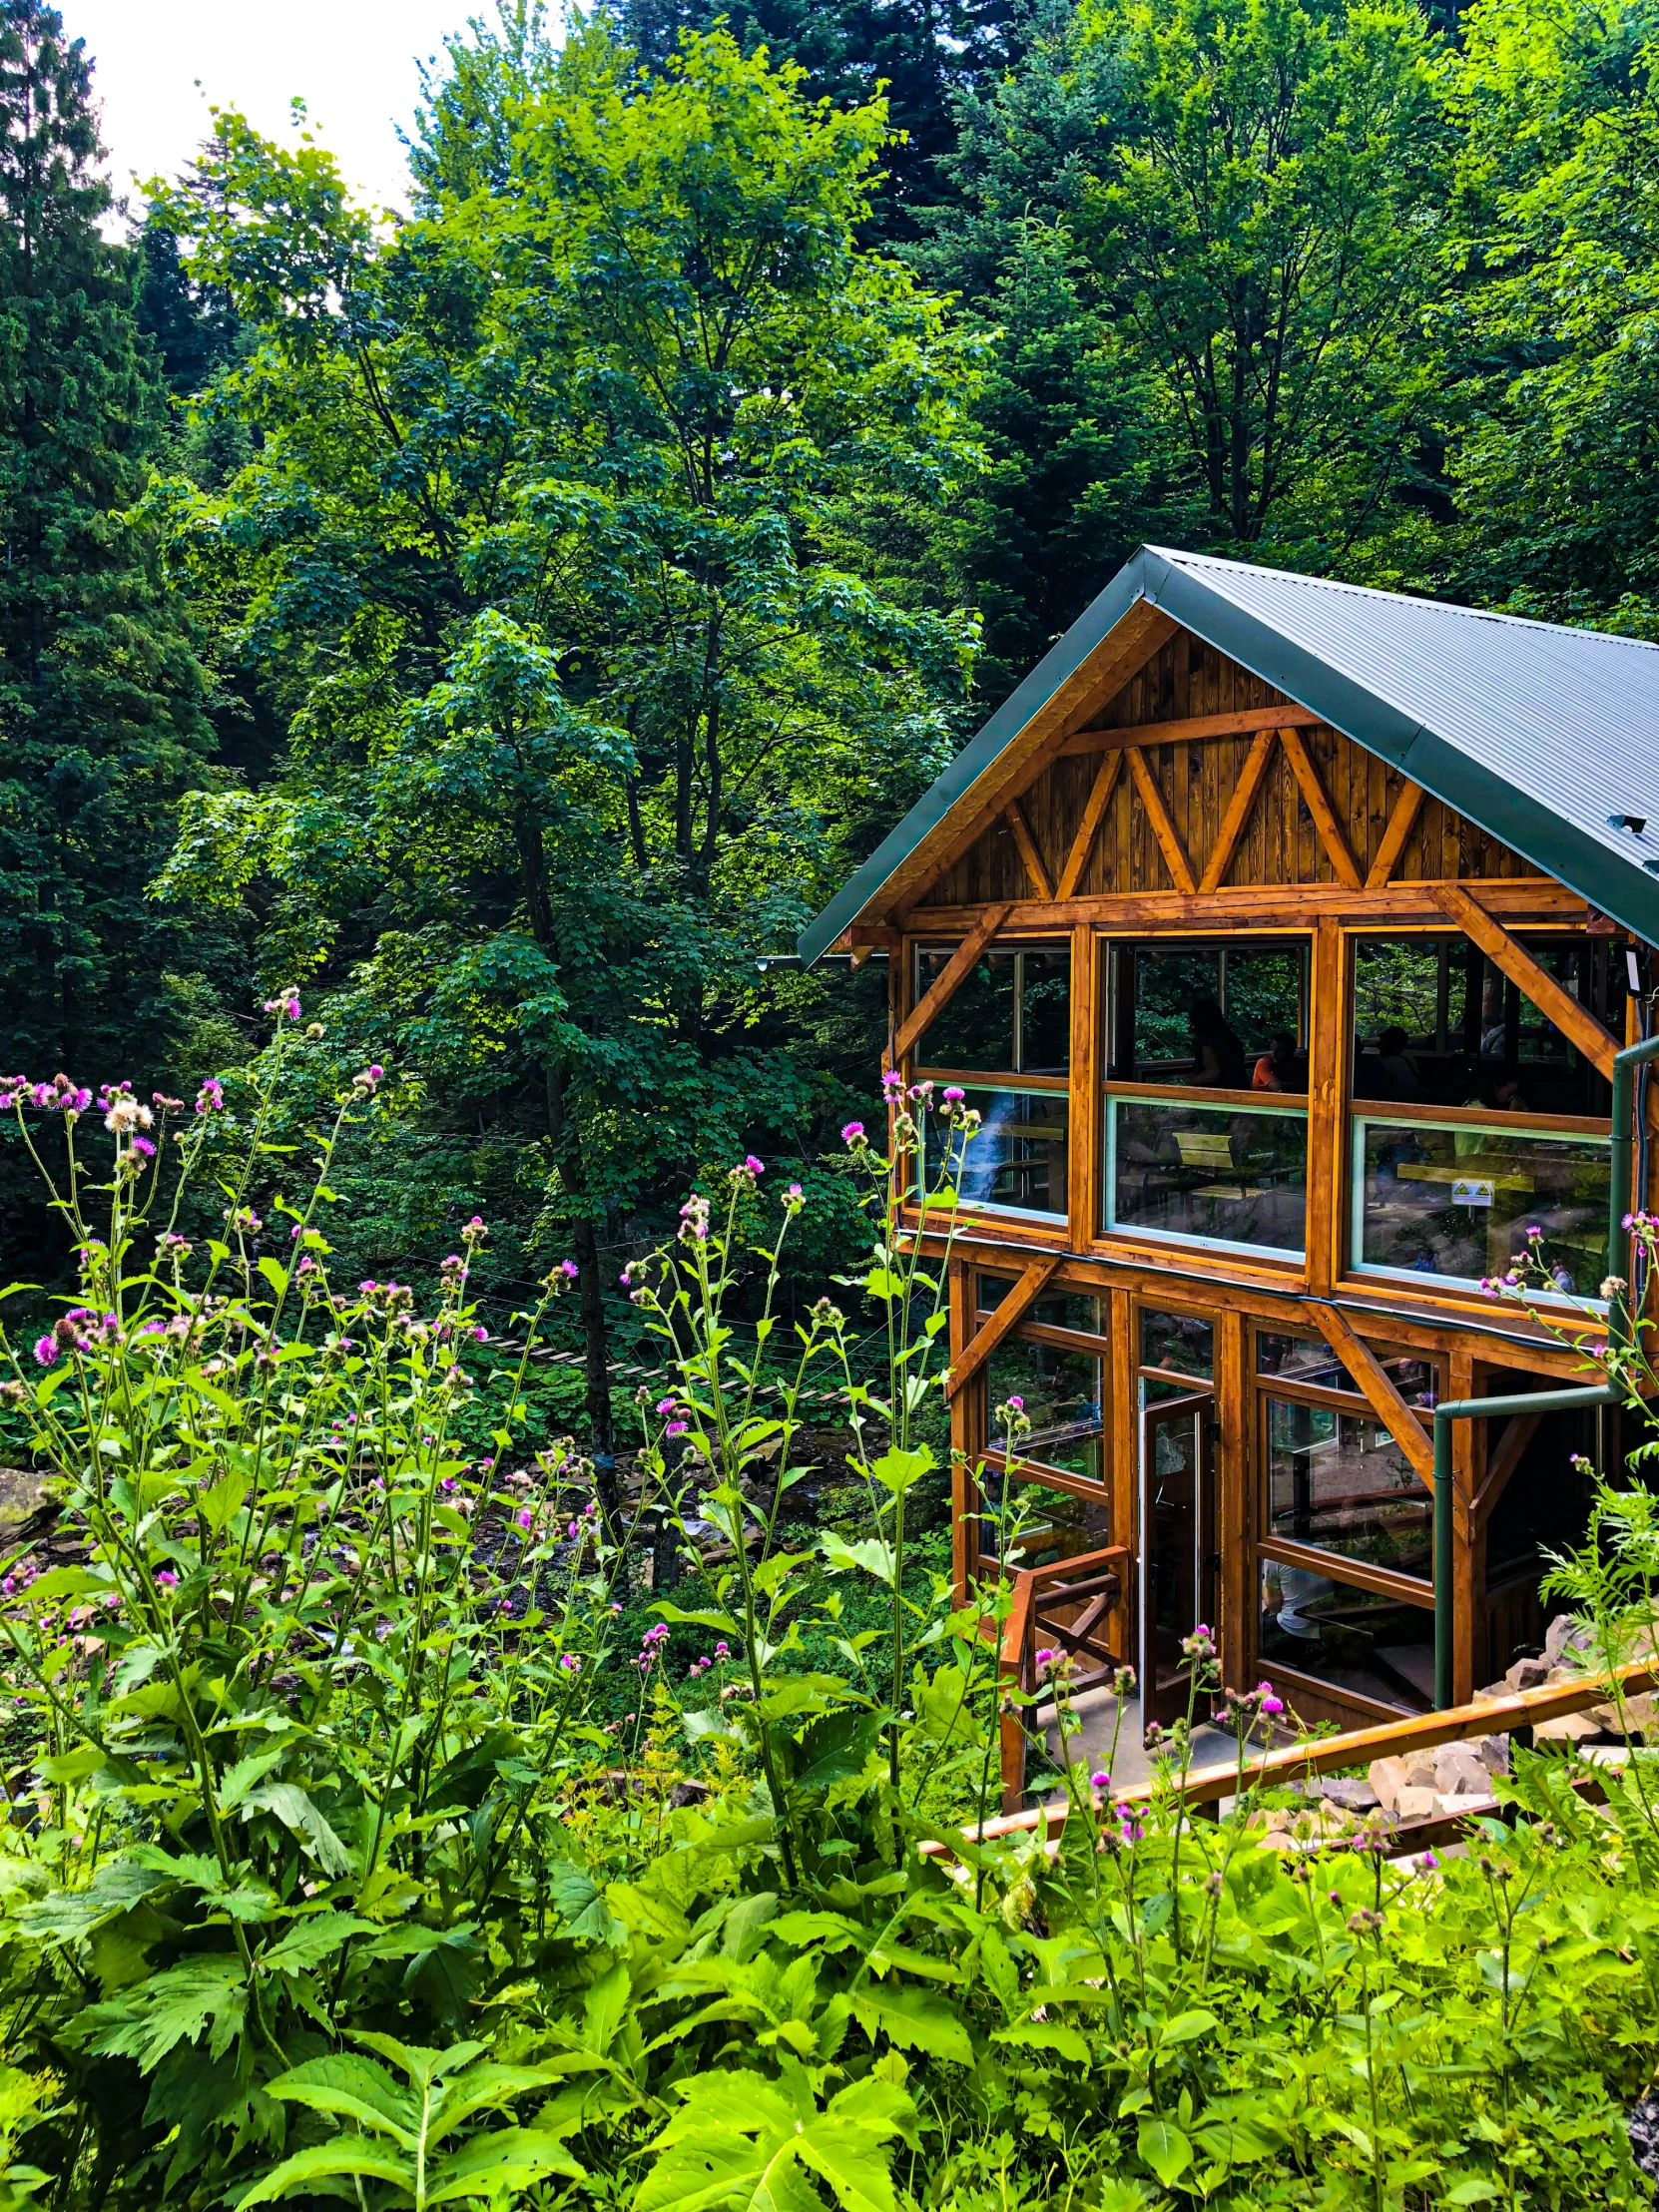 a cabin nestled in a forested area with flowers around